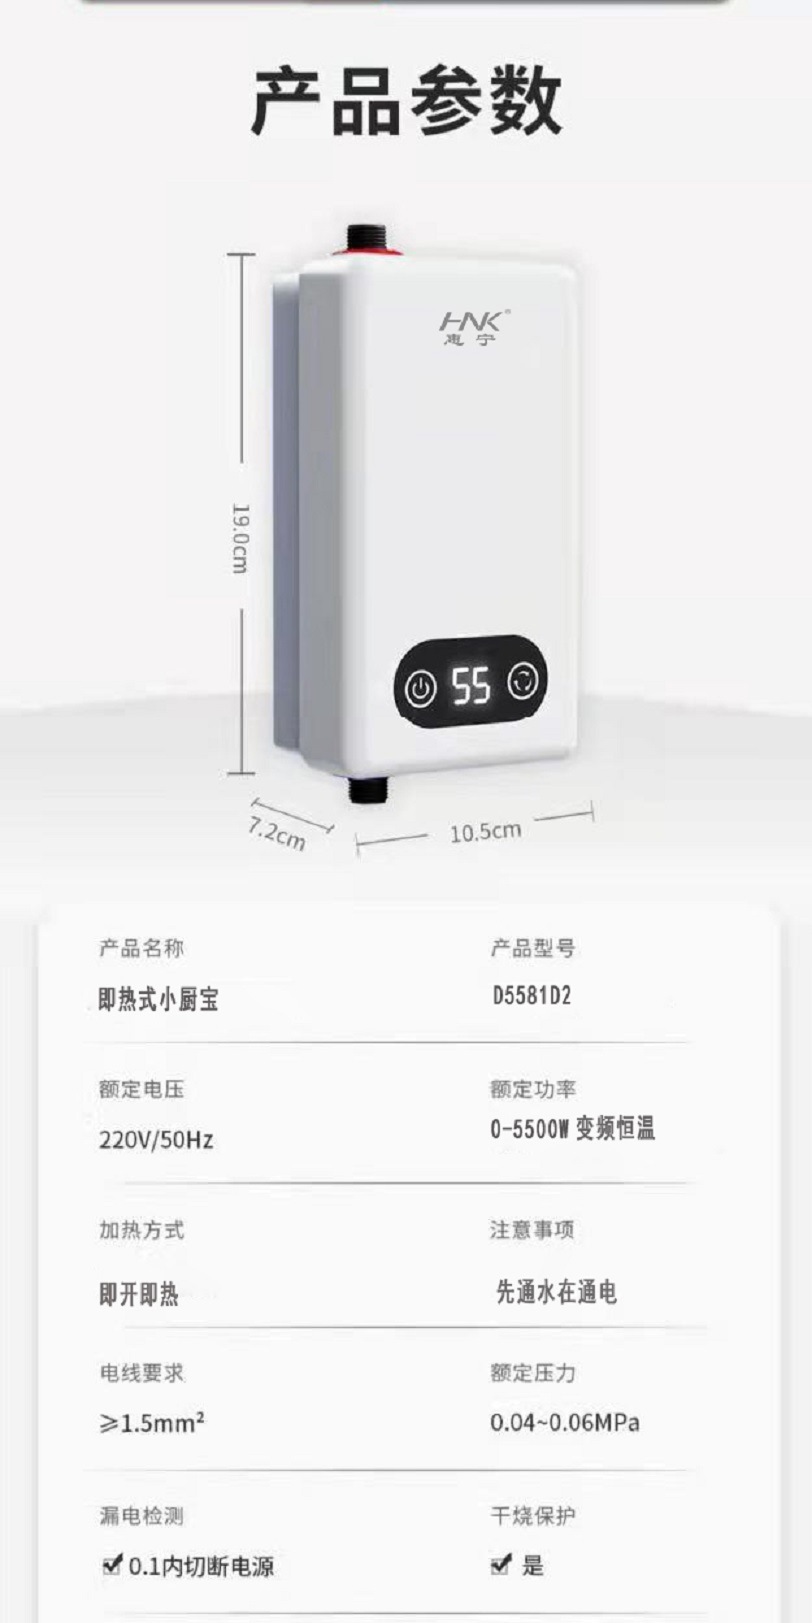 Variable-frequency Constant-temperature Instant Electric Water Heater Kitchen Treasure Electric Faucet Water Heater Wash Your Face And Vegetables.